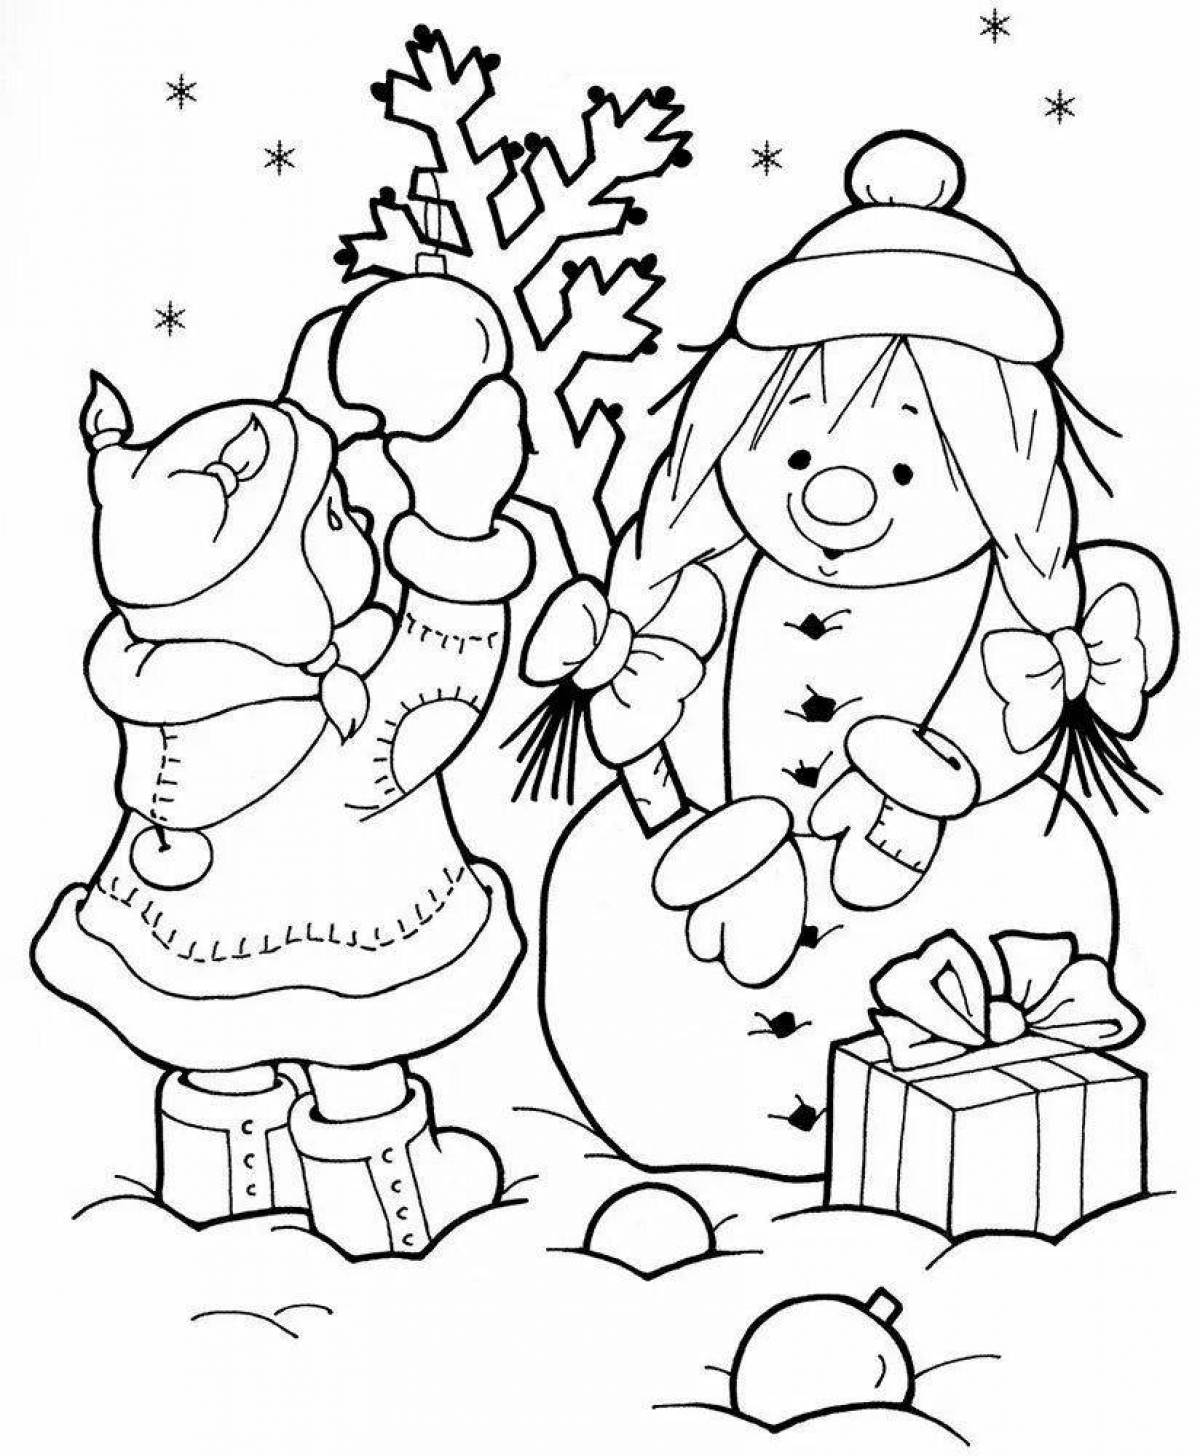 Great coloring book for children 2-3 years old for kindergarten in winter